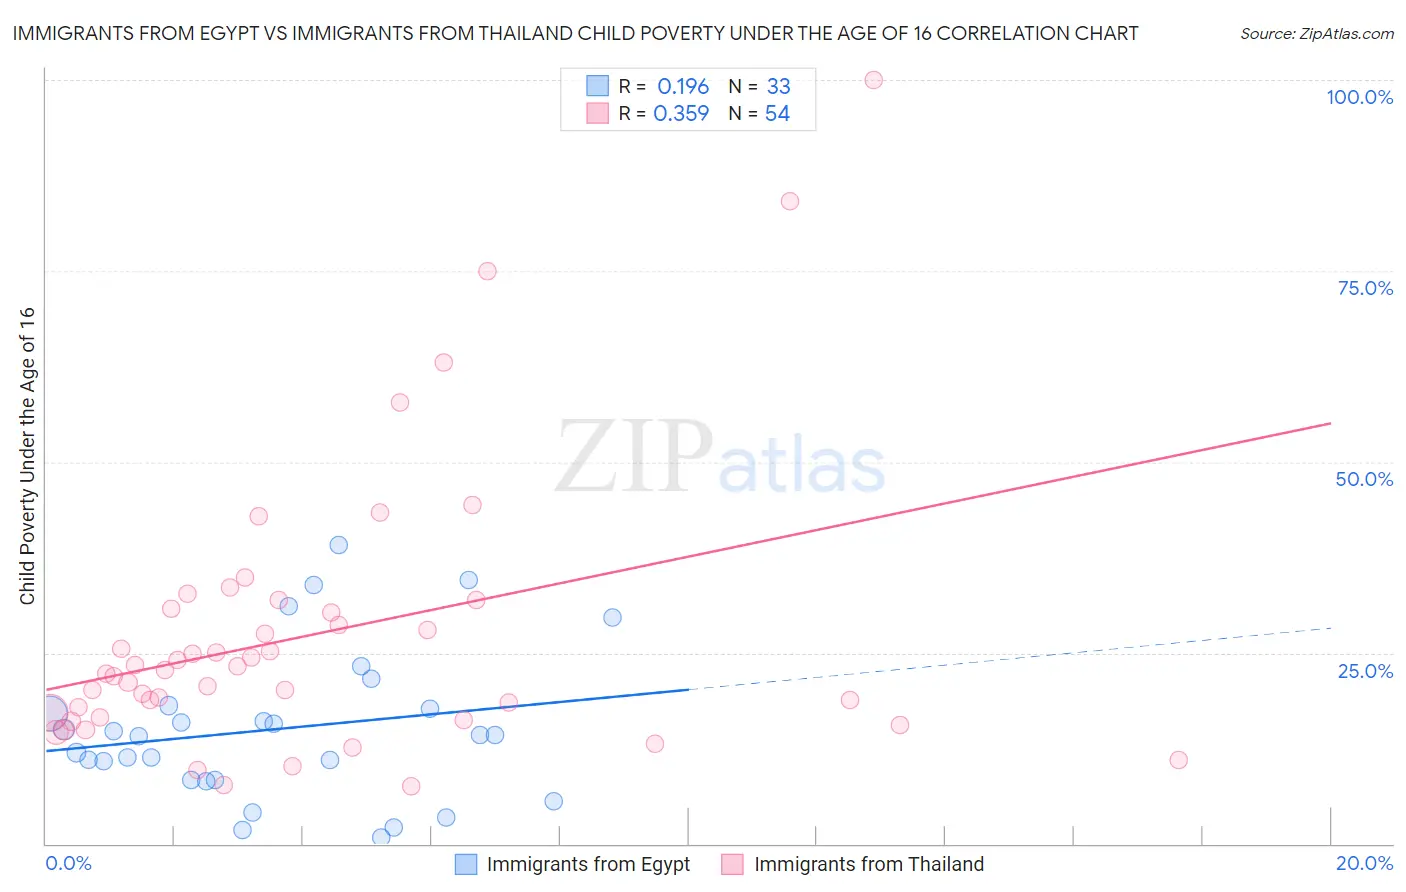 Immigrants from Egypt vs Immigrants from Thailand Child Poverty Under the Age of 16